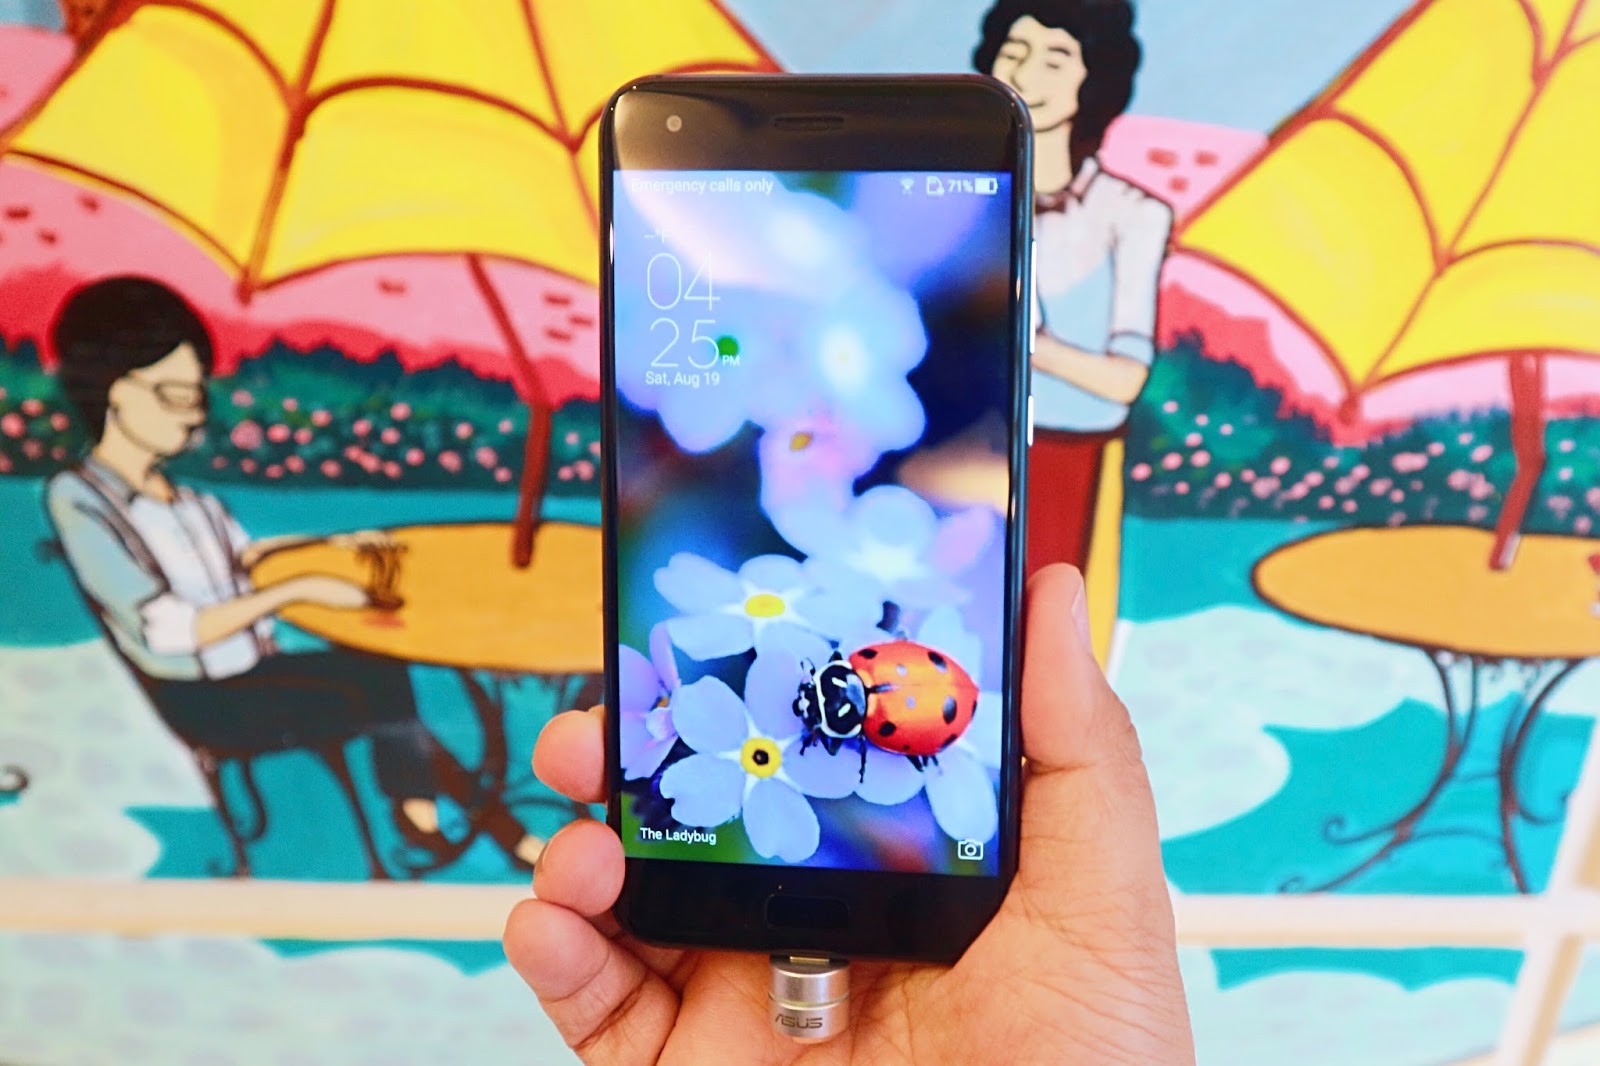 ASUS Zenfone 4 is now available in the Philippines